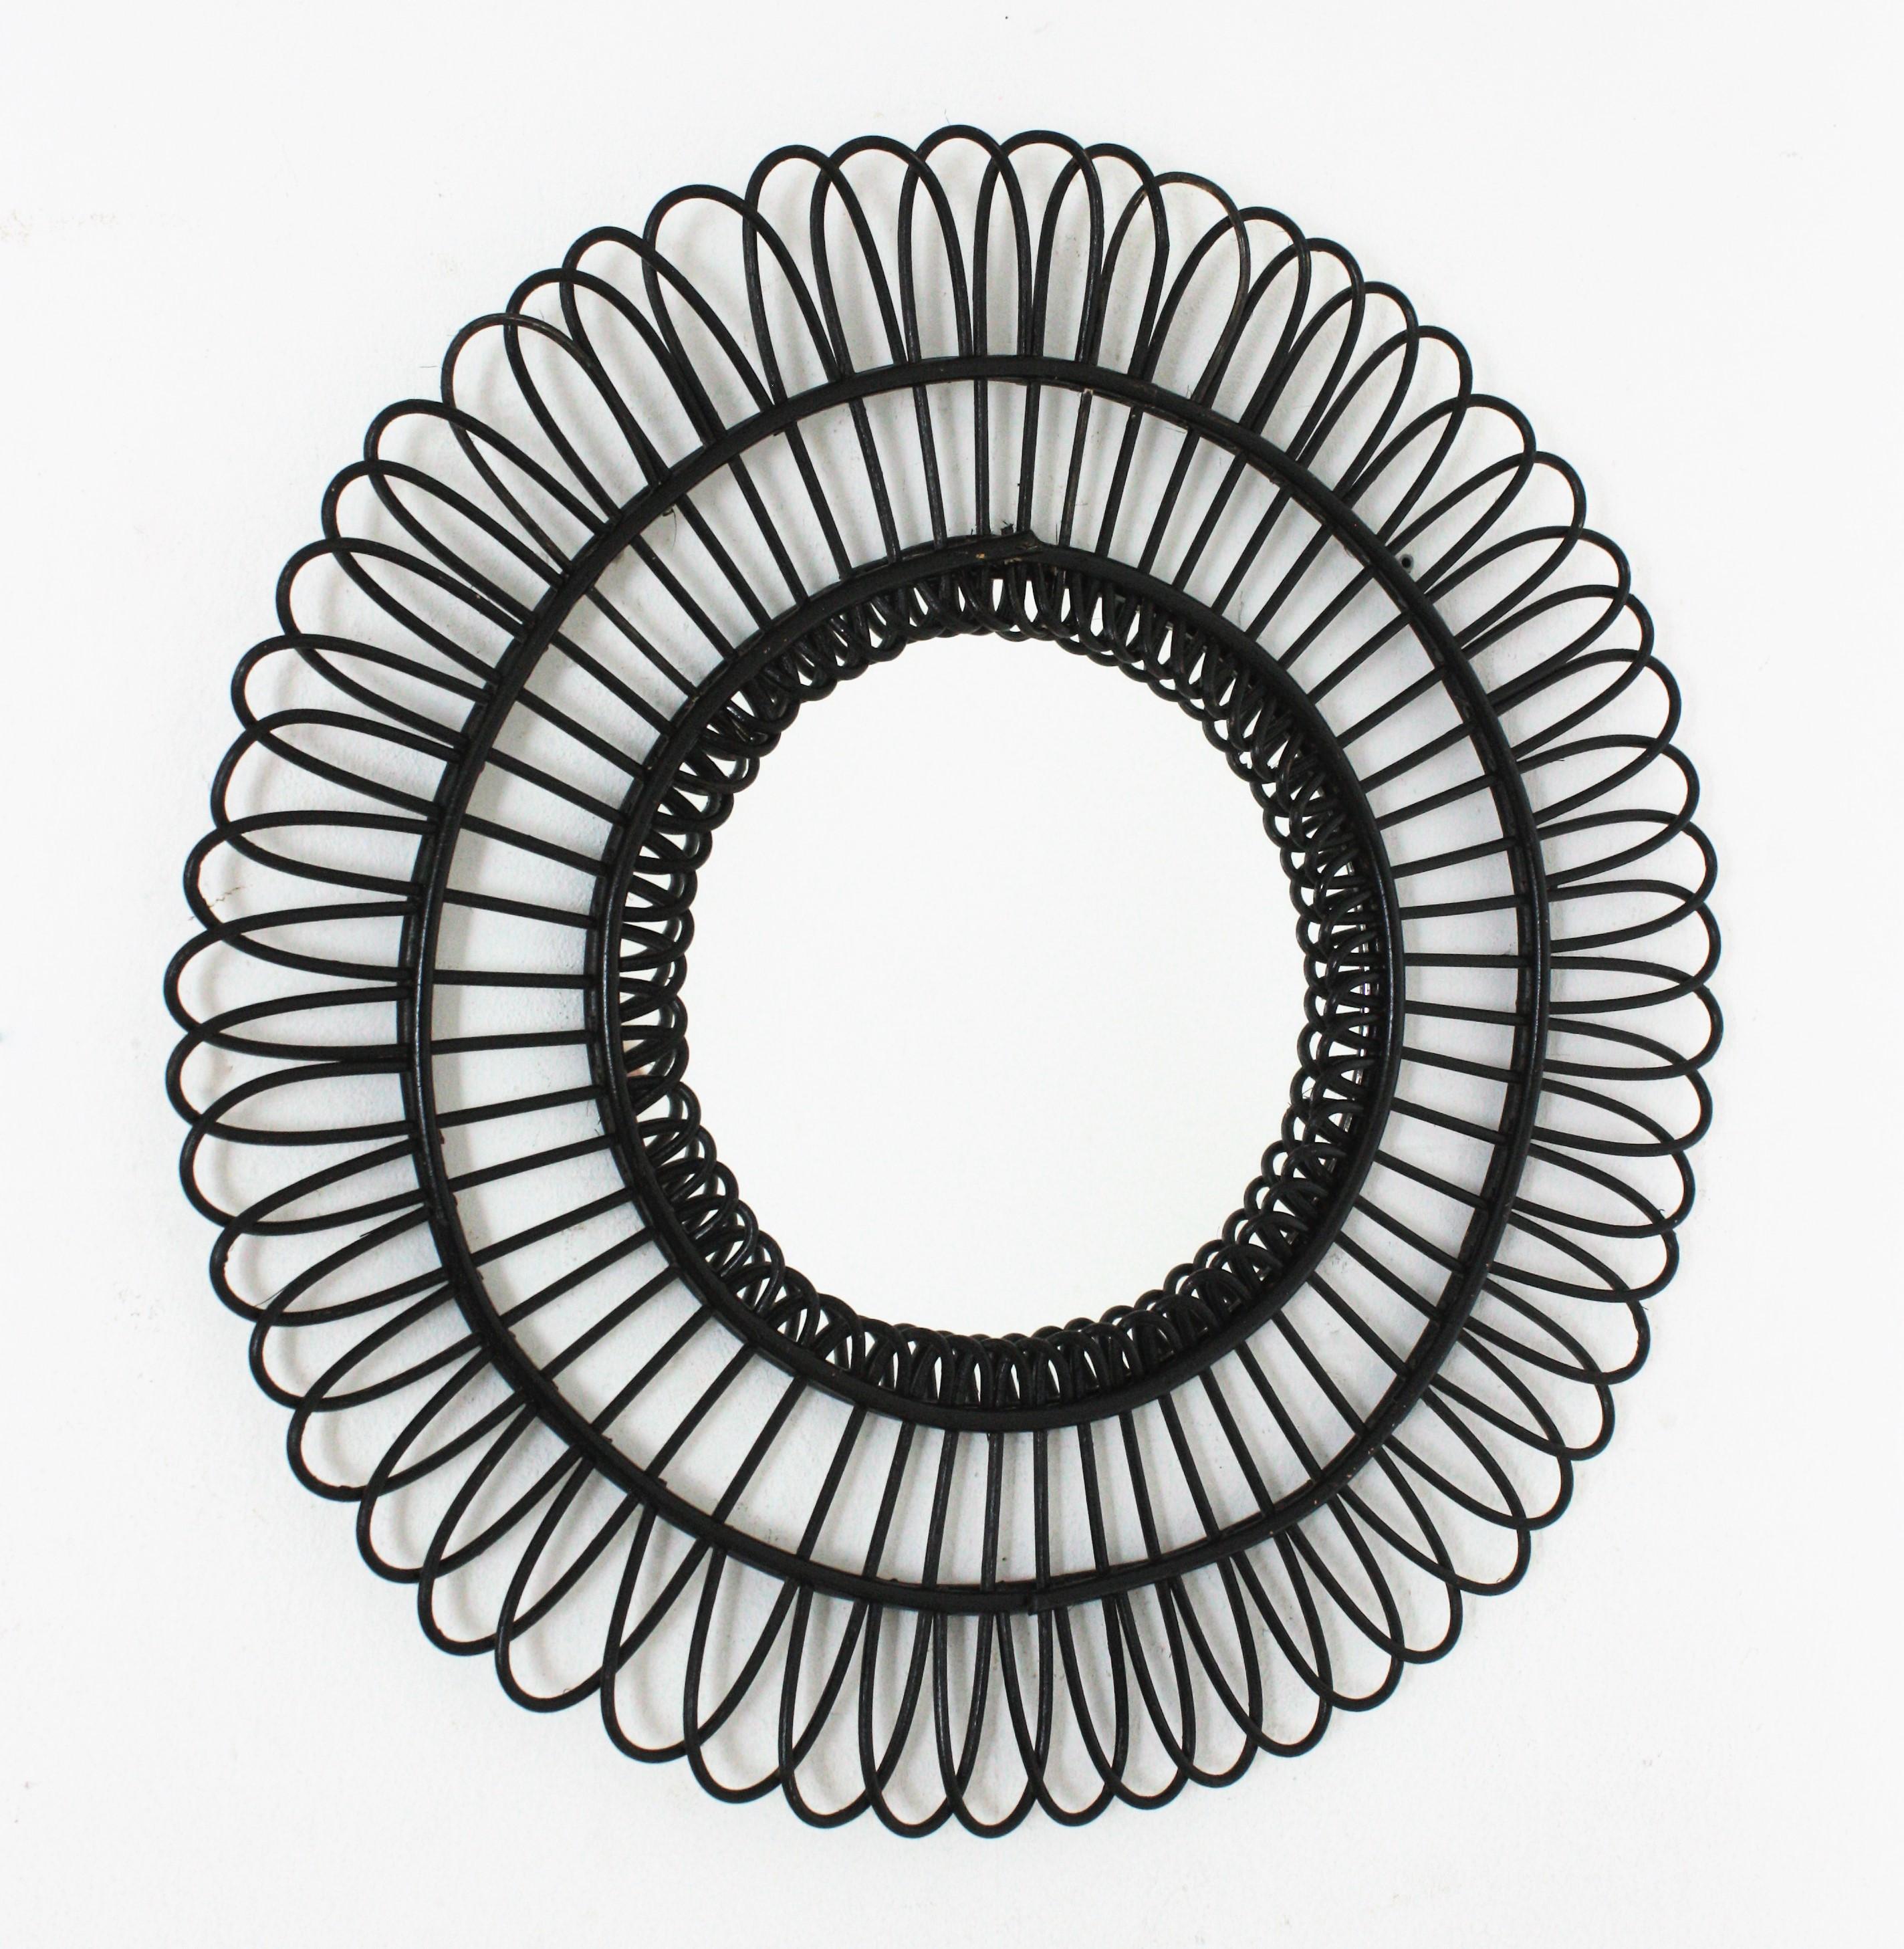 Black Mid-Century Modern rattan mirror, Spain 1960s.
This handcrafted mirror features a round rattan frame with rattan petals placed in sunburst or flower disposition.
This wall mirror would be a nice addition in a contemporary or classical